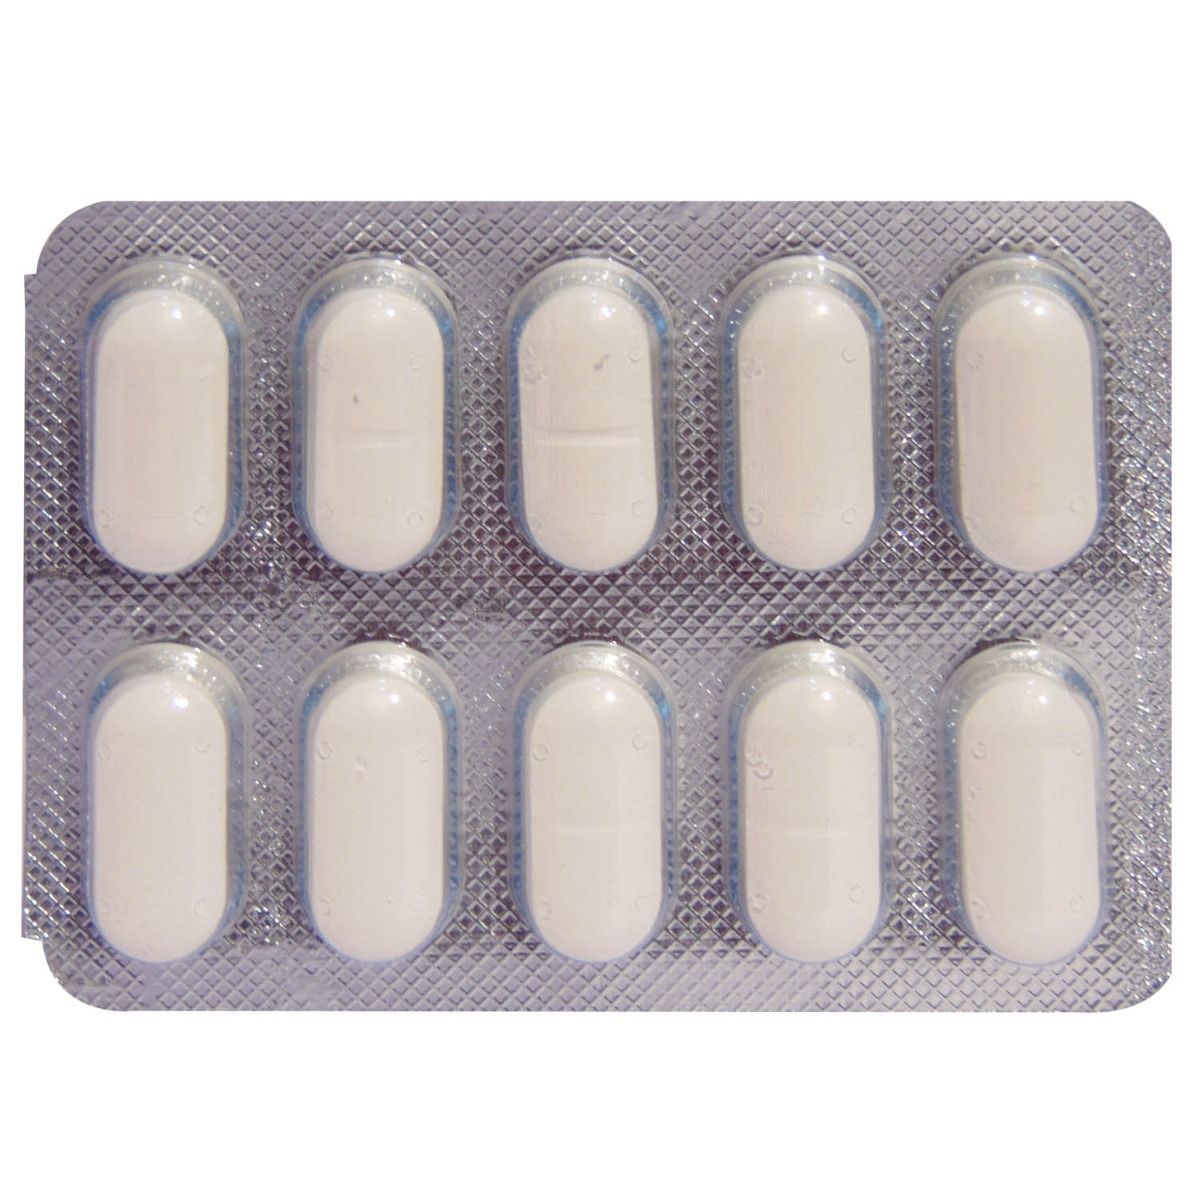 Texakind Tablet 10's, Pack of 10 TABLETS